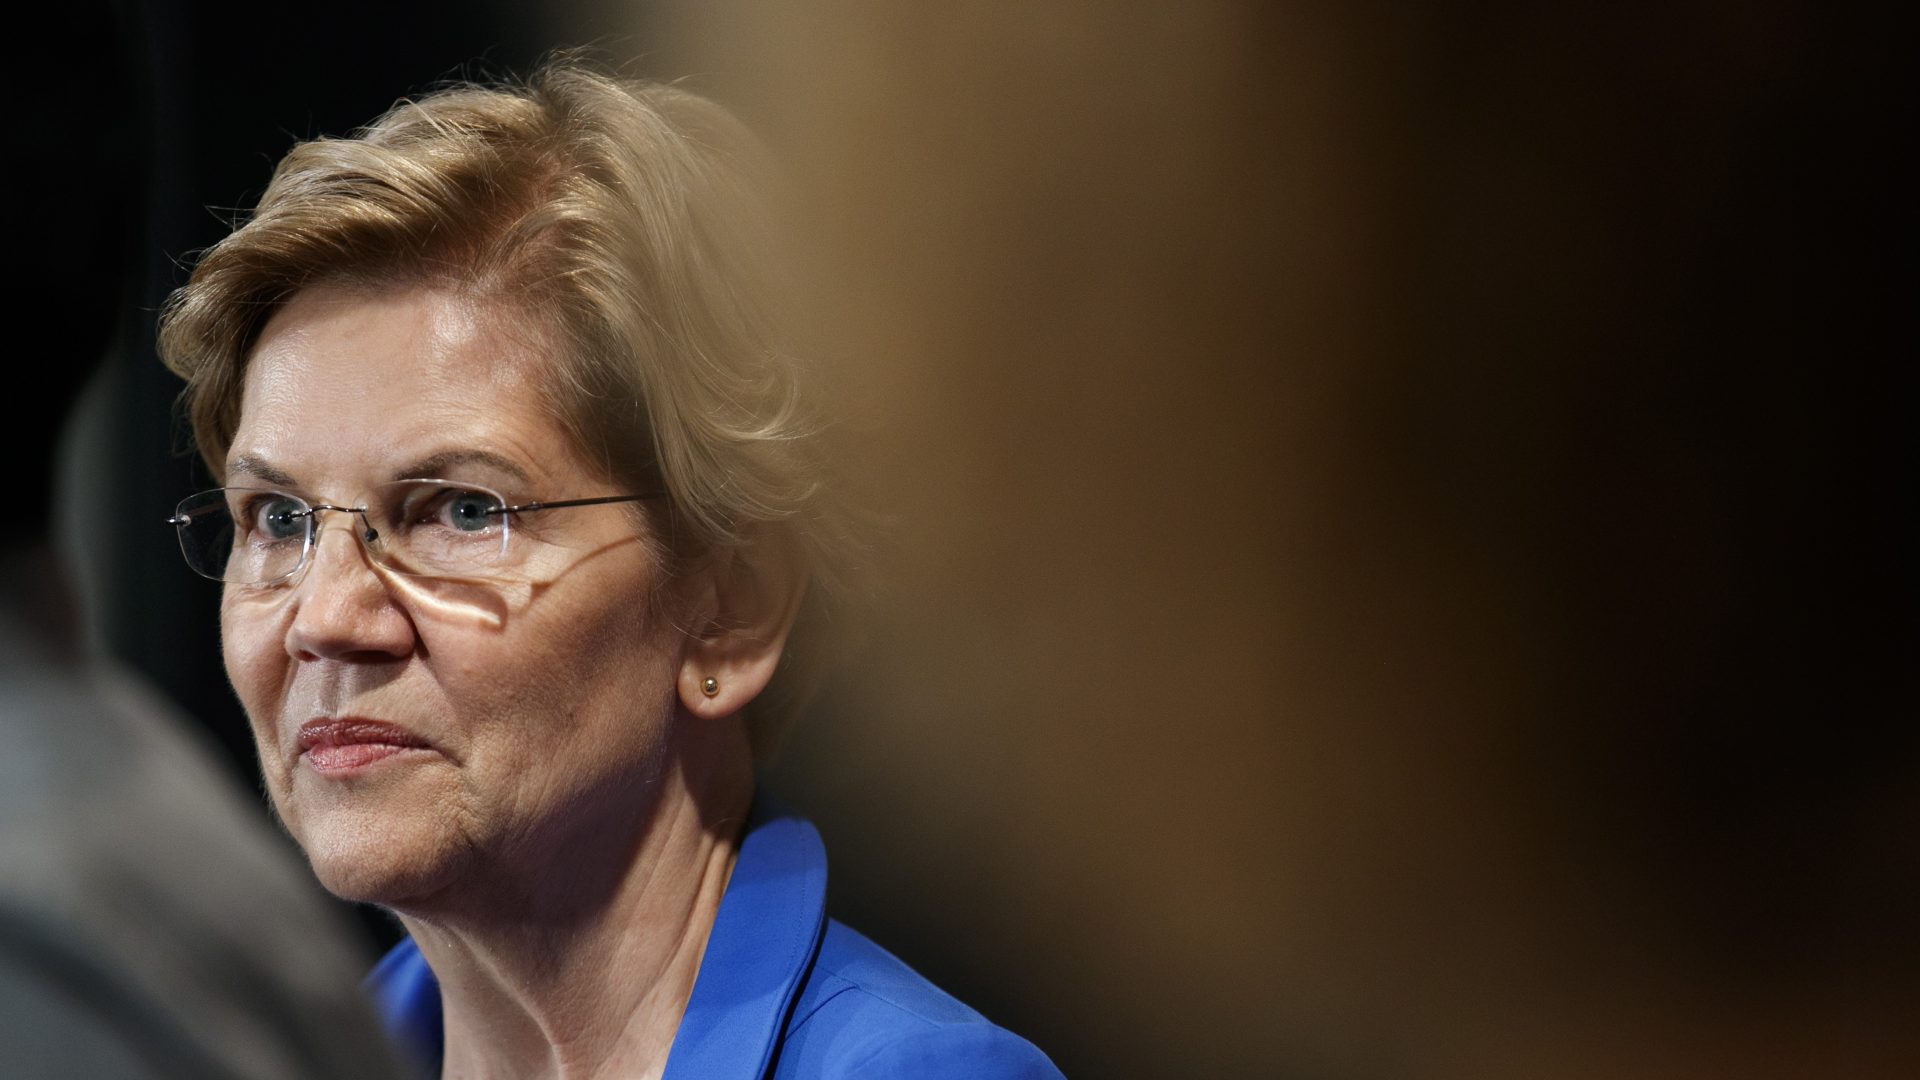 “The chaos and the attempt to suppress the vote in Wisconsin, should be a wake up call for the United States Congress,” Sen. Warren told NPR. “We need to act immediately.”